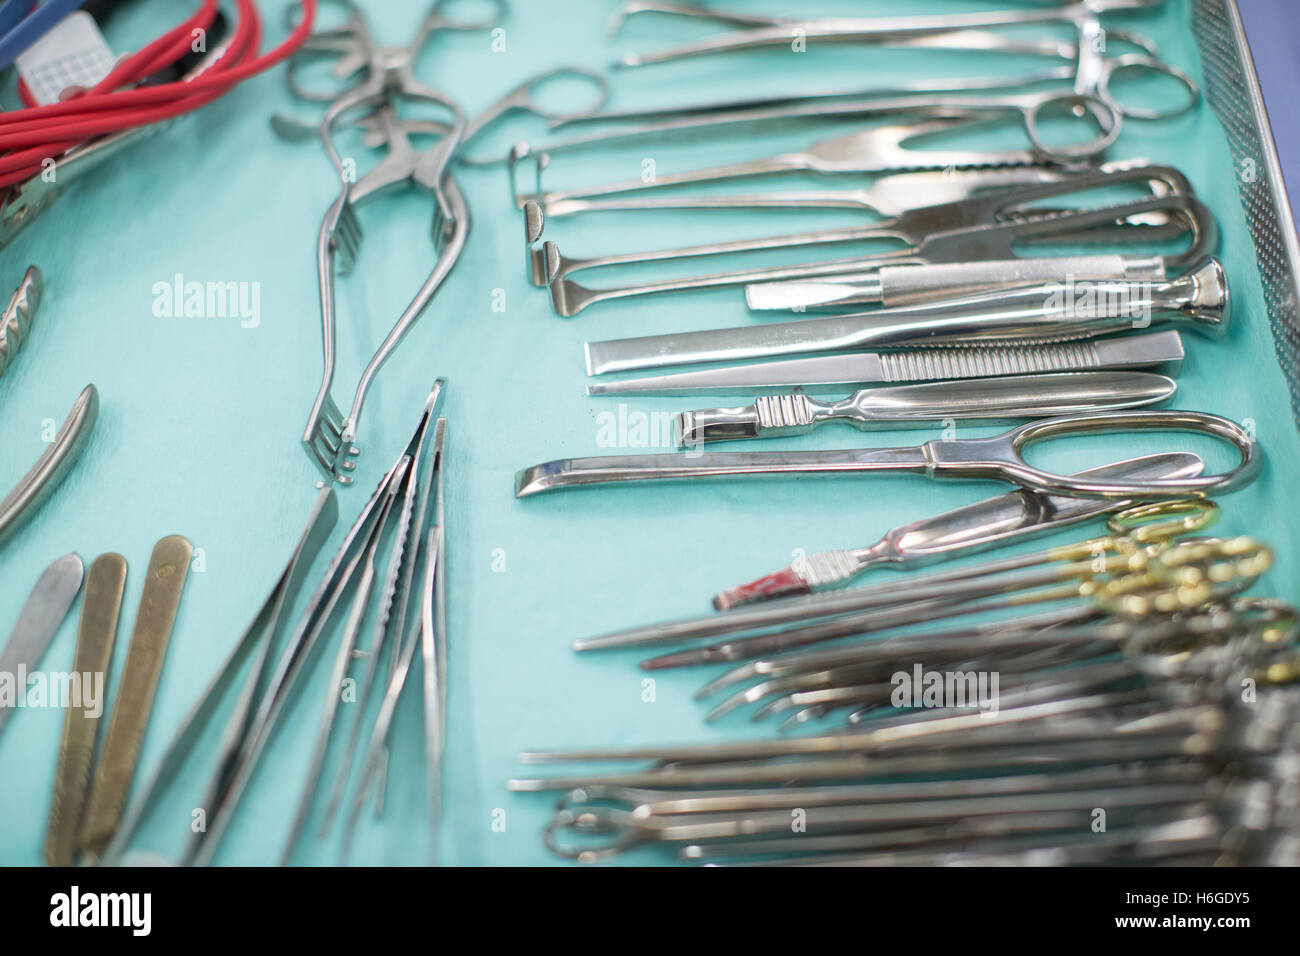 Surgical instruments,clamps,scalpels and scissors laid out in a tray in the operating theatre Stock Photo